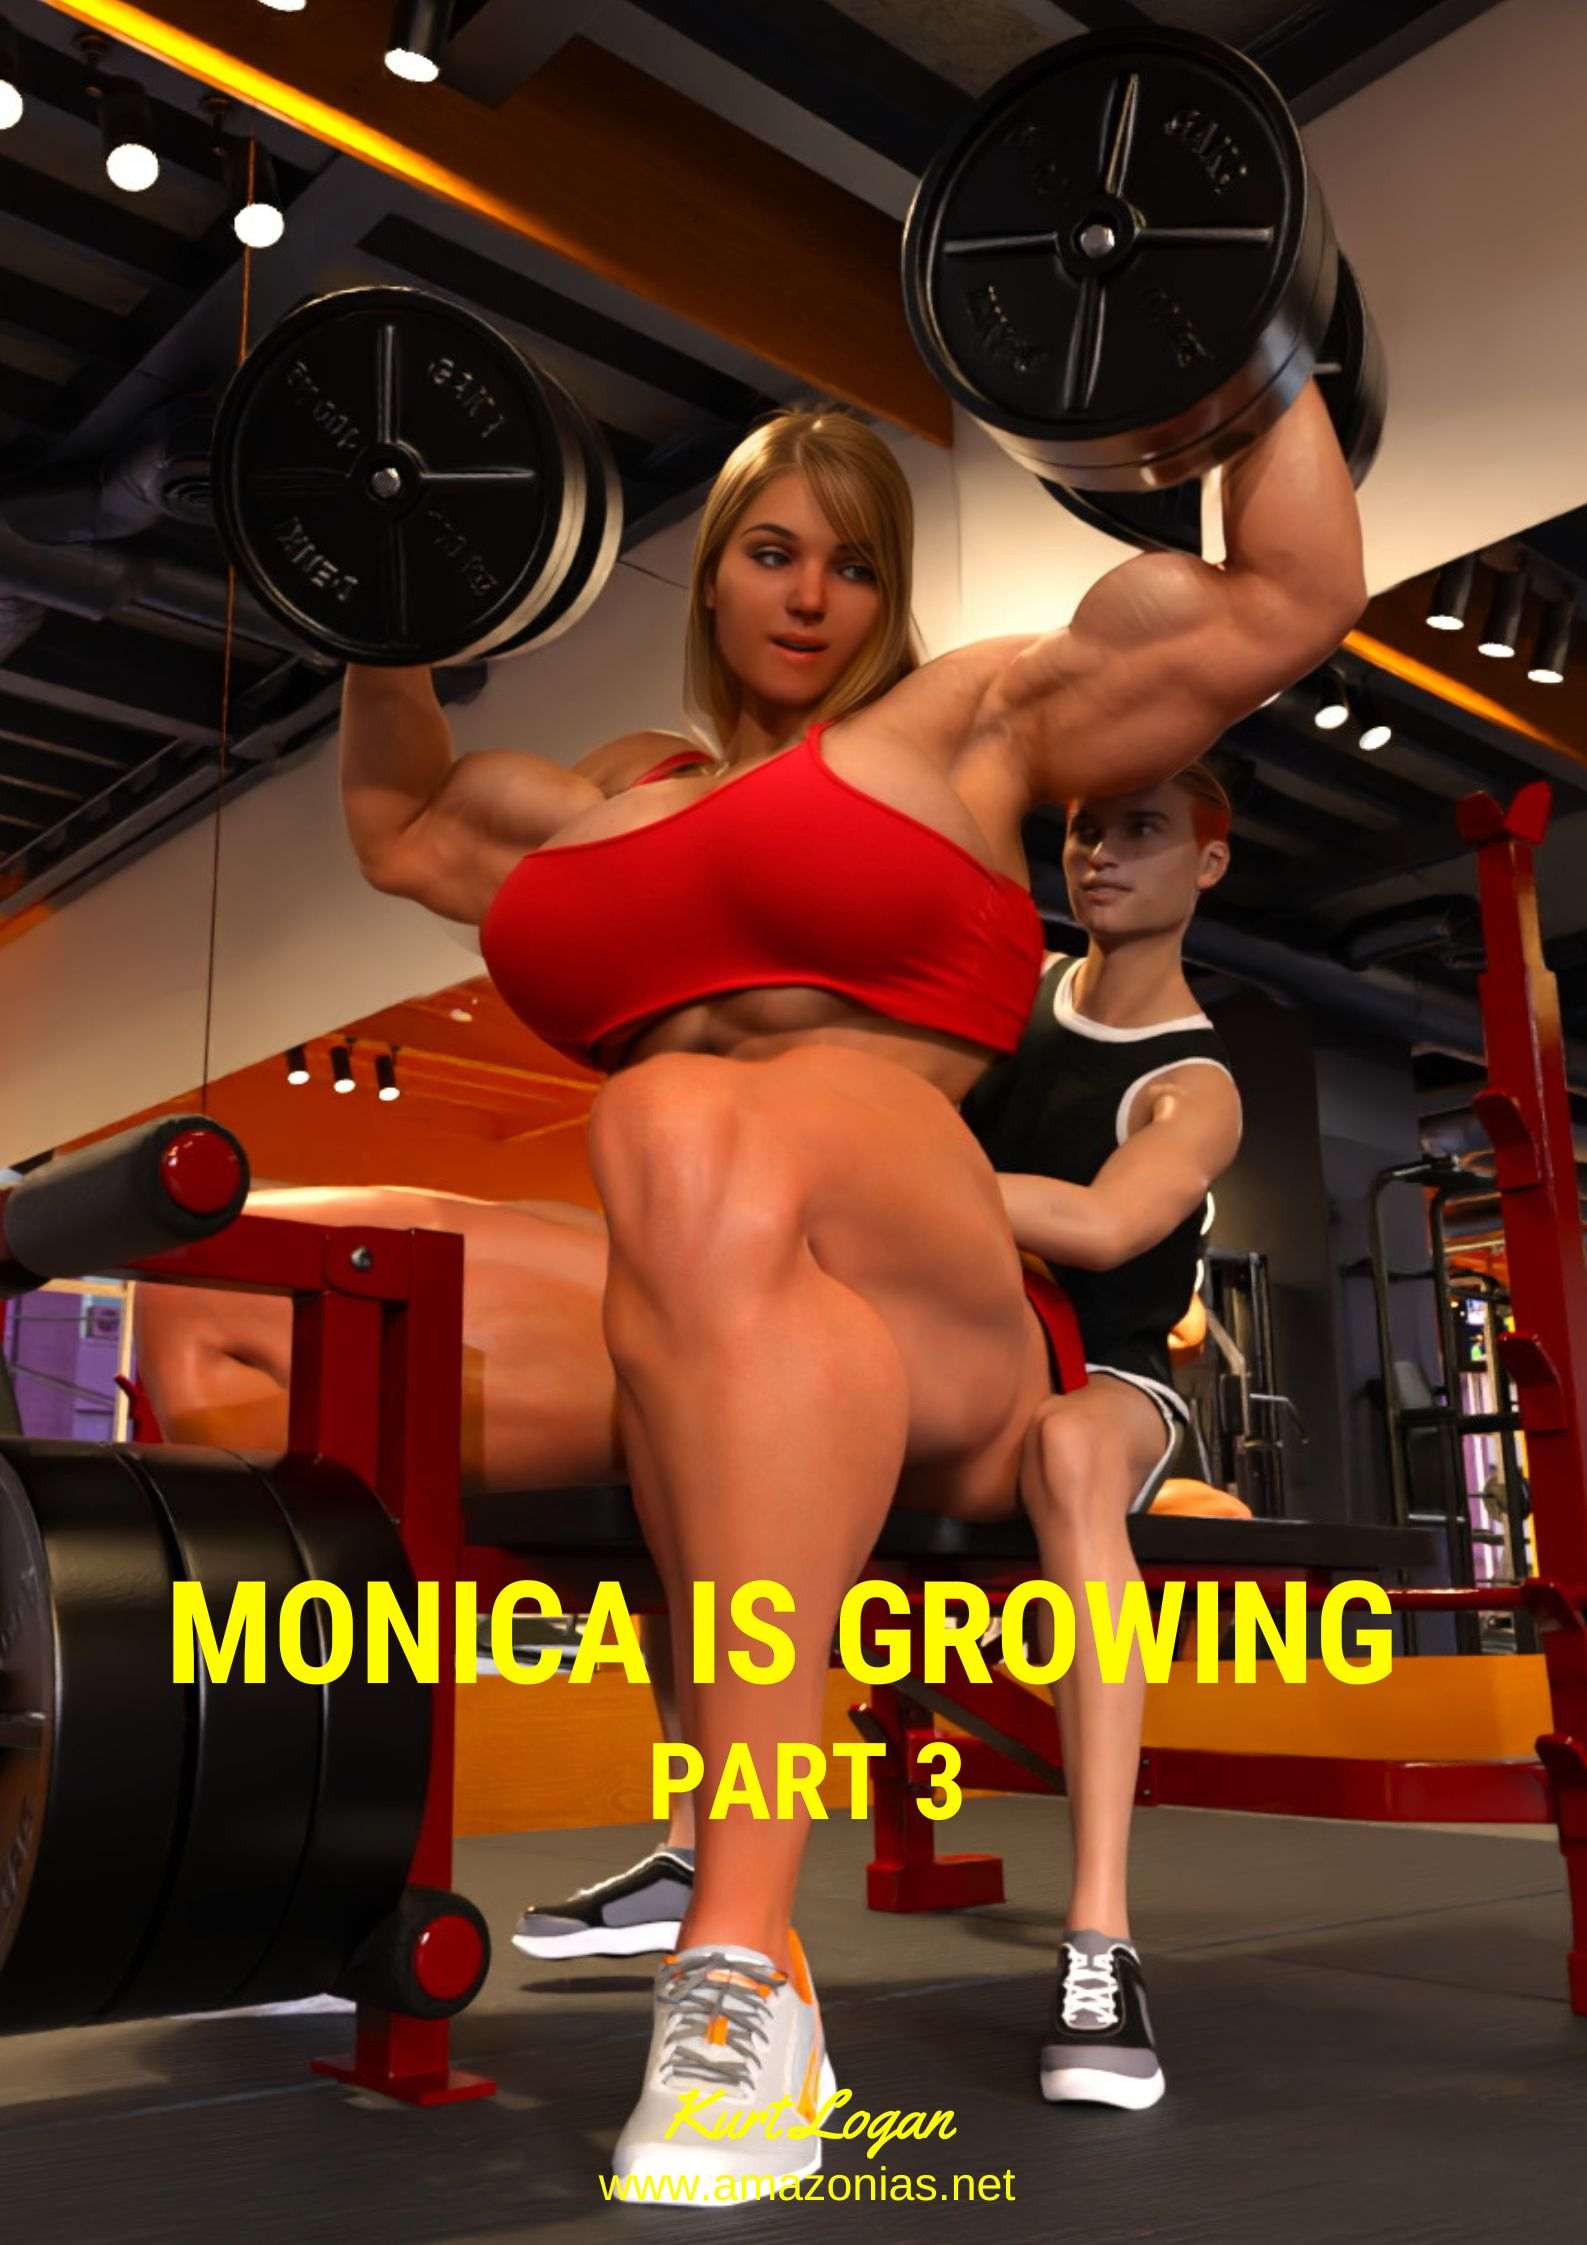 huge female bodybuilder working out in the gym